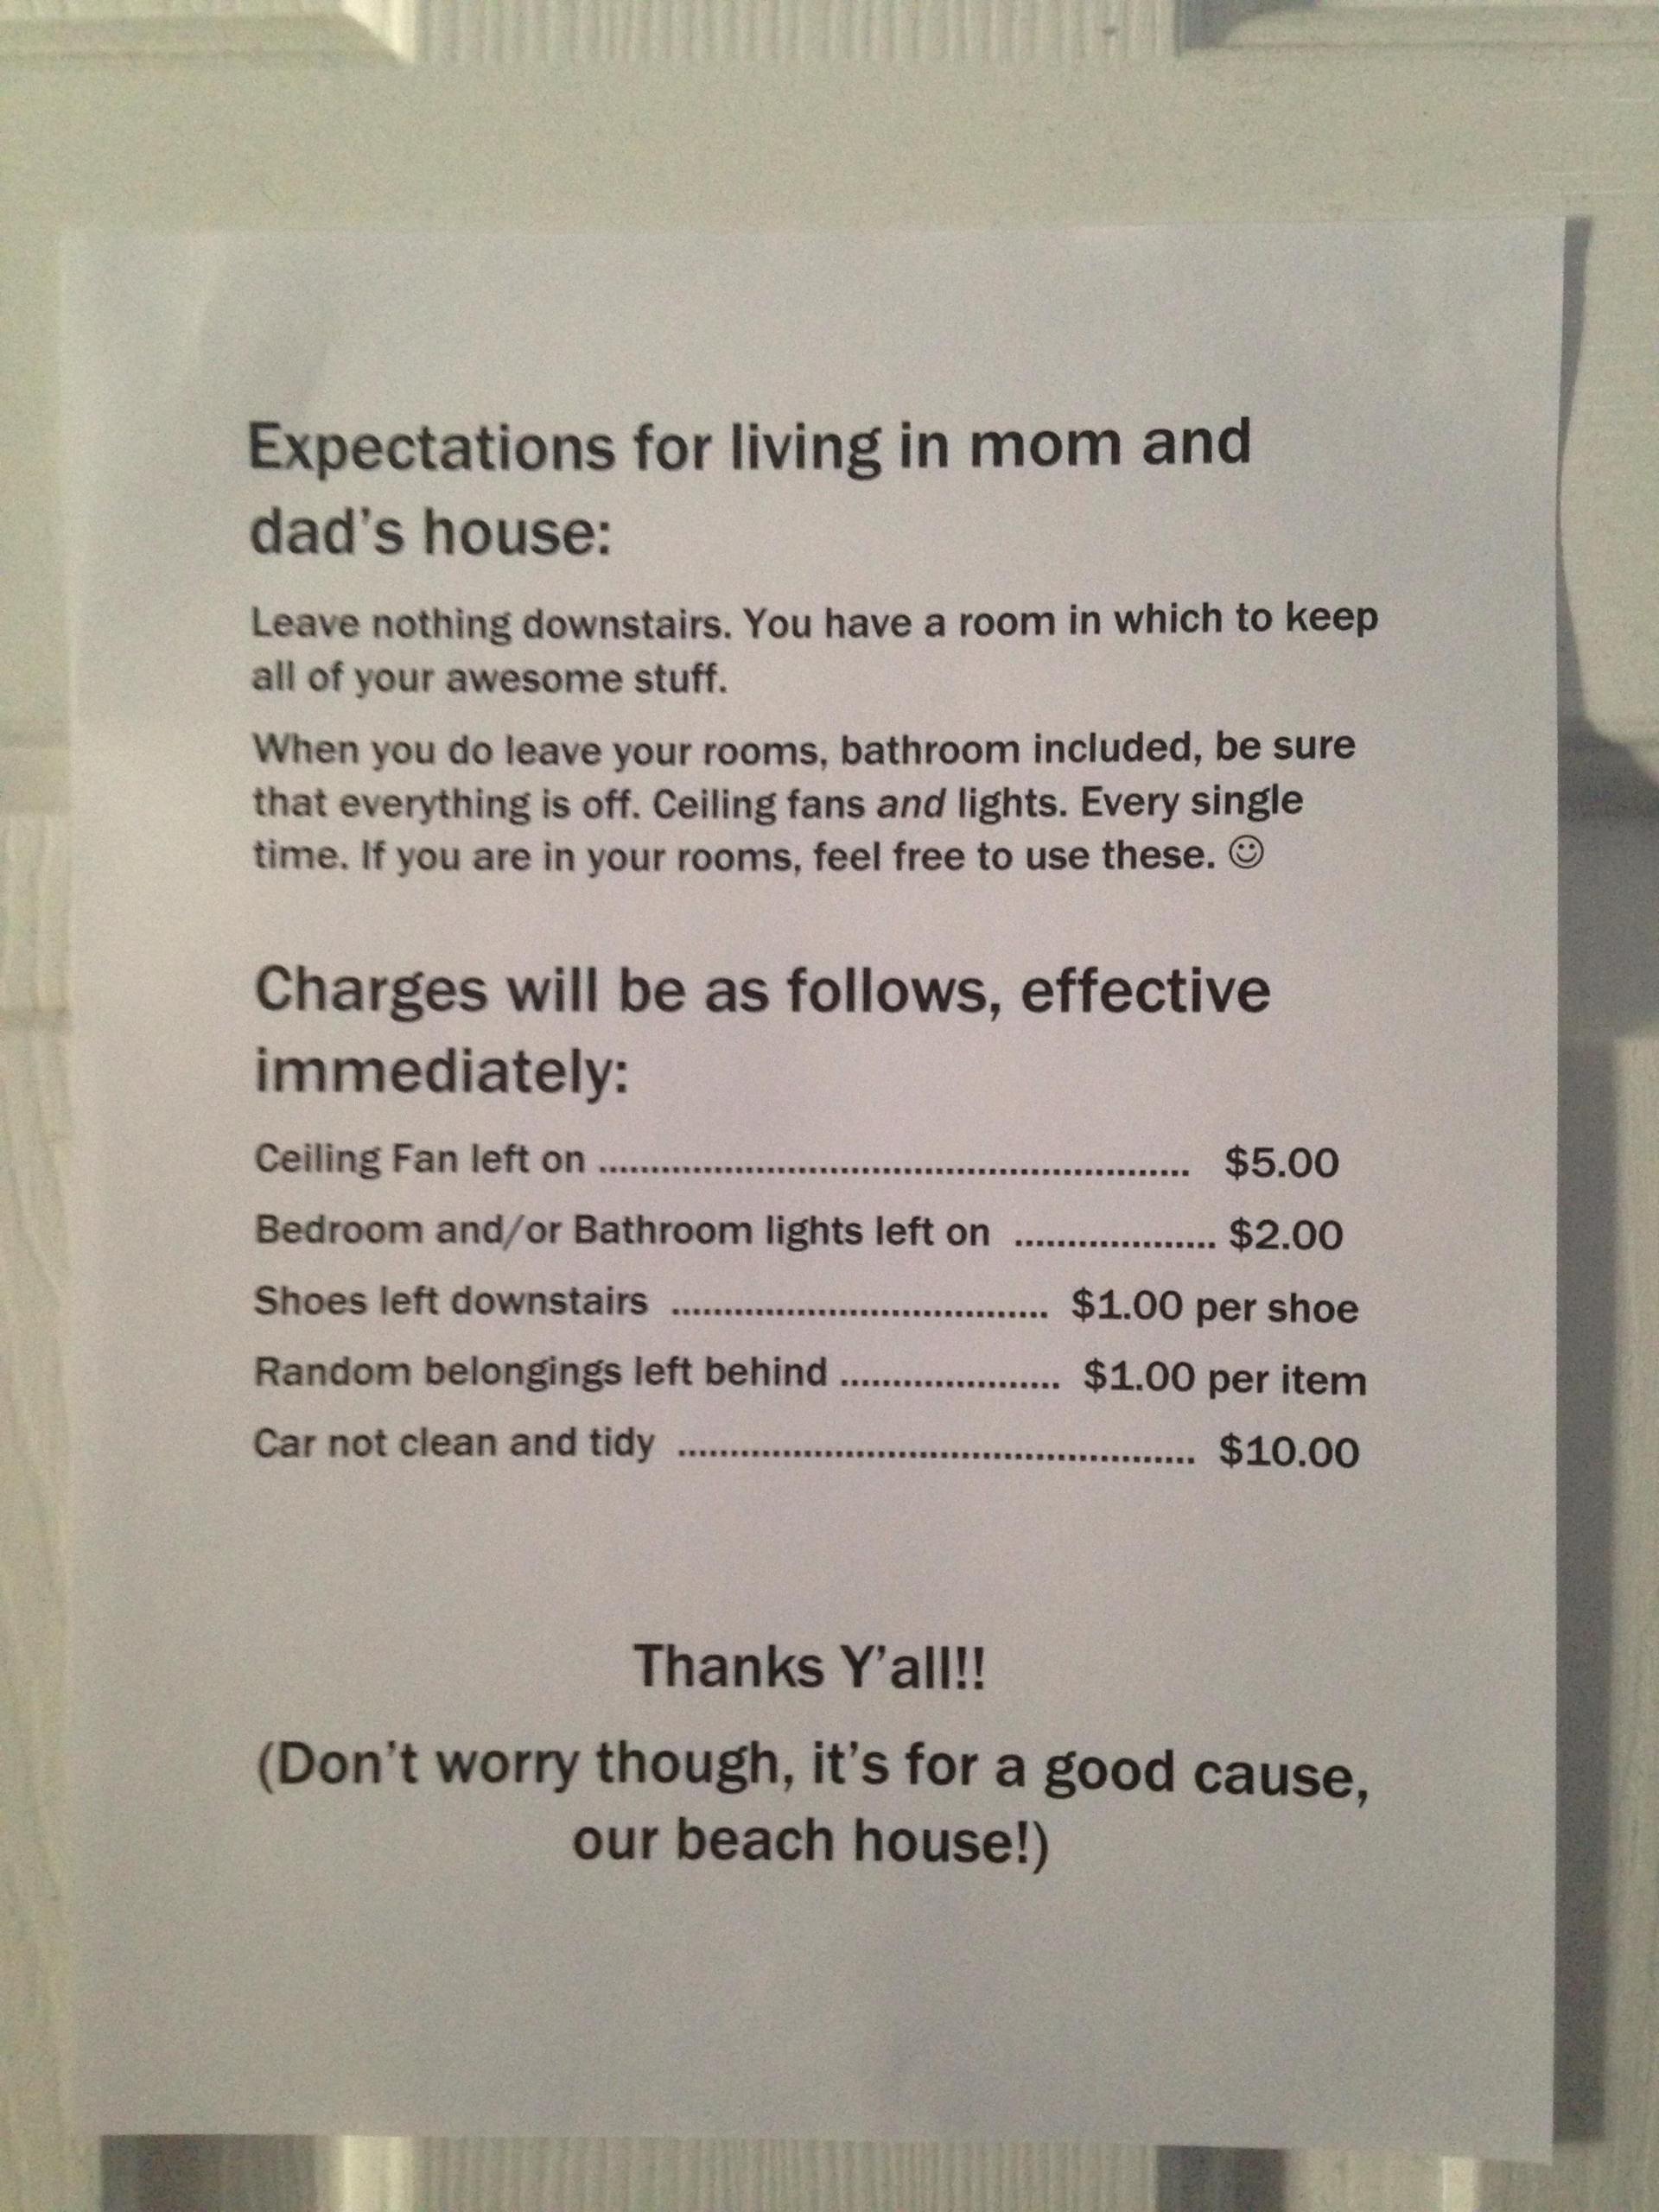 Expectations for living in mom’s and dad’s house